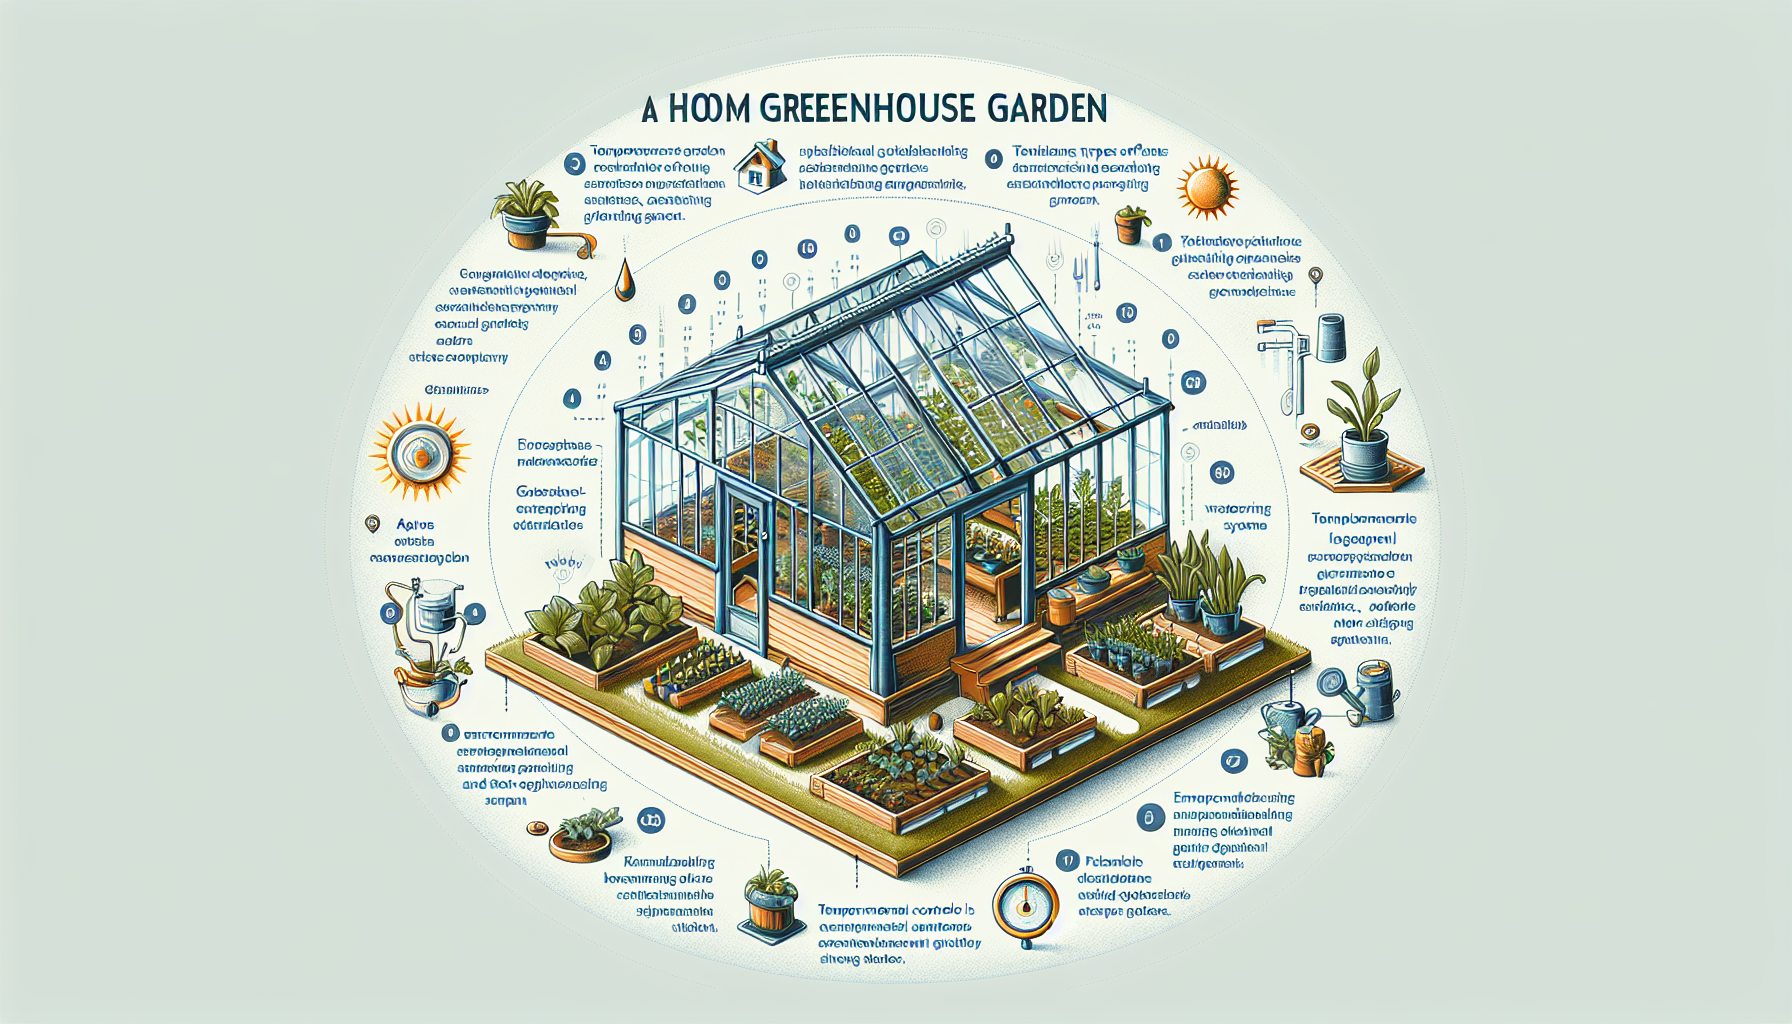 The Complete Guide to Home Greenhouse Gardening